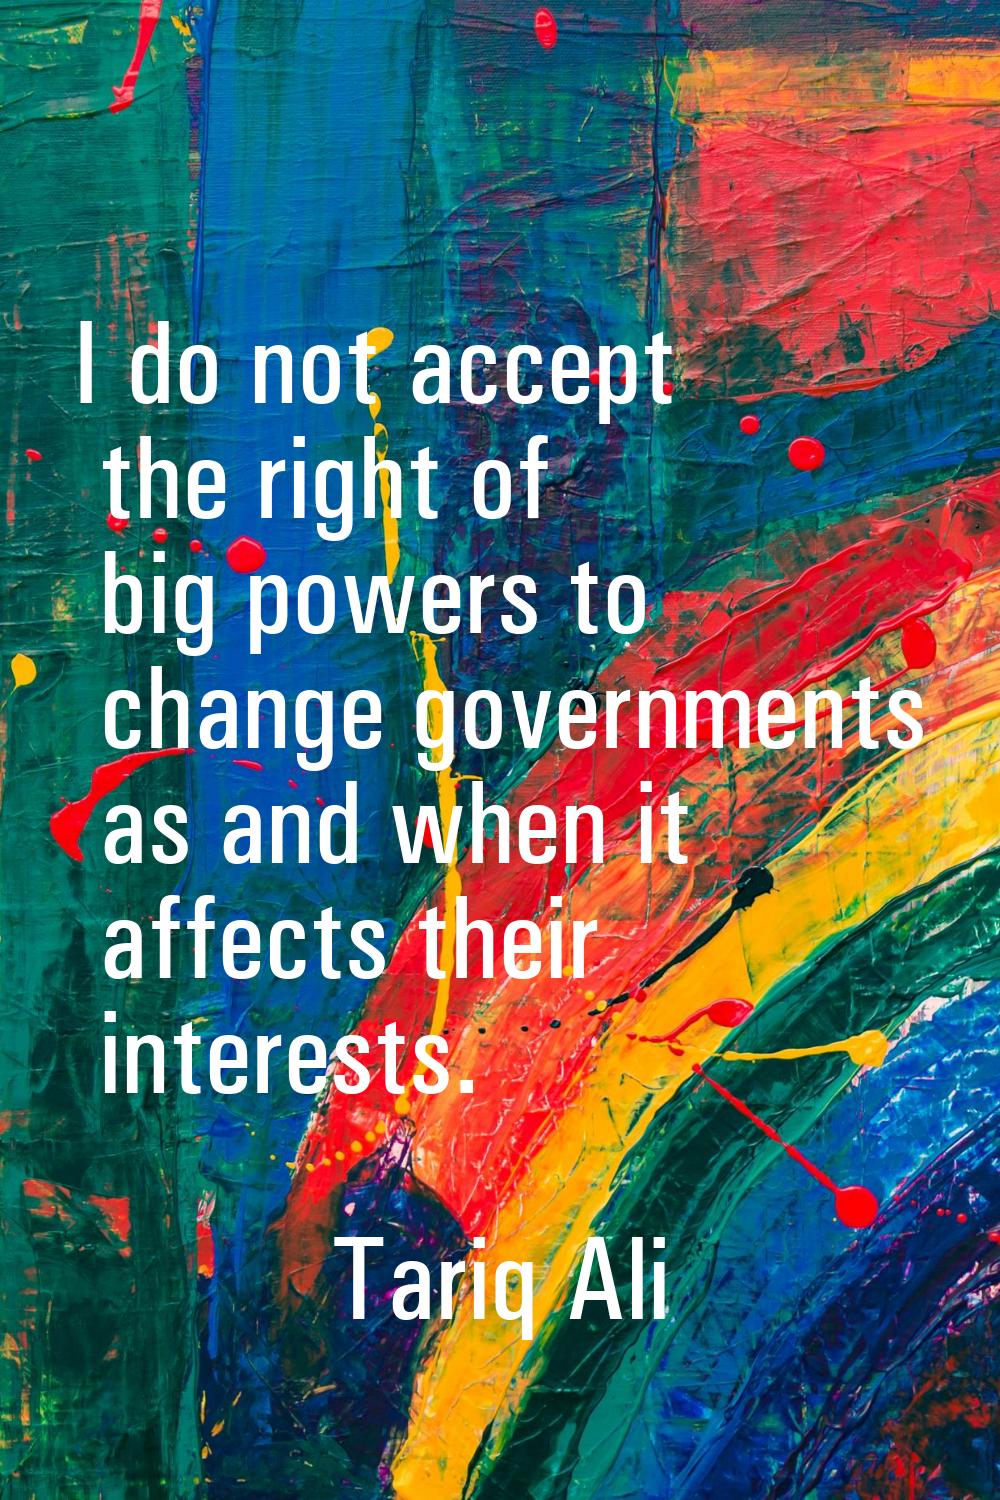 I do not accept the right of big powers to change governments as and when it affects their interest